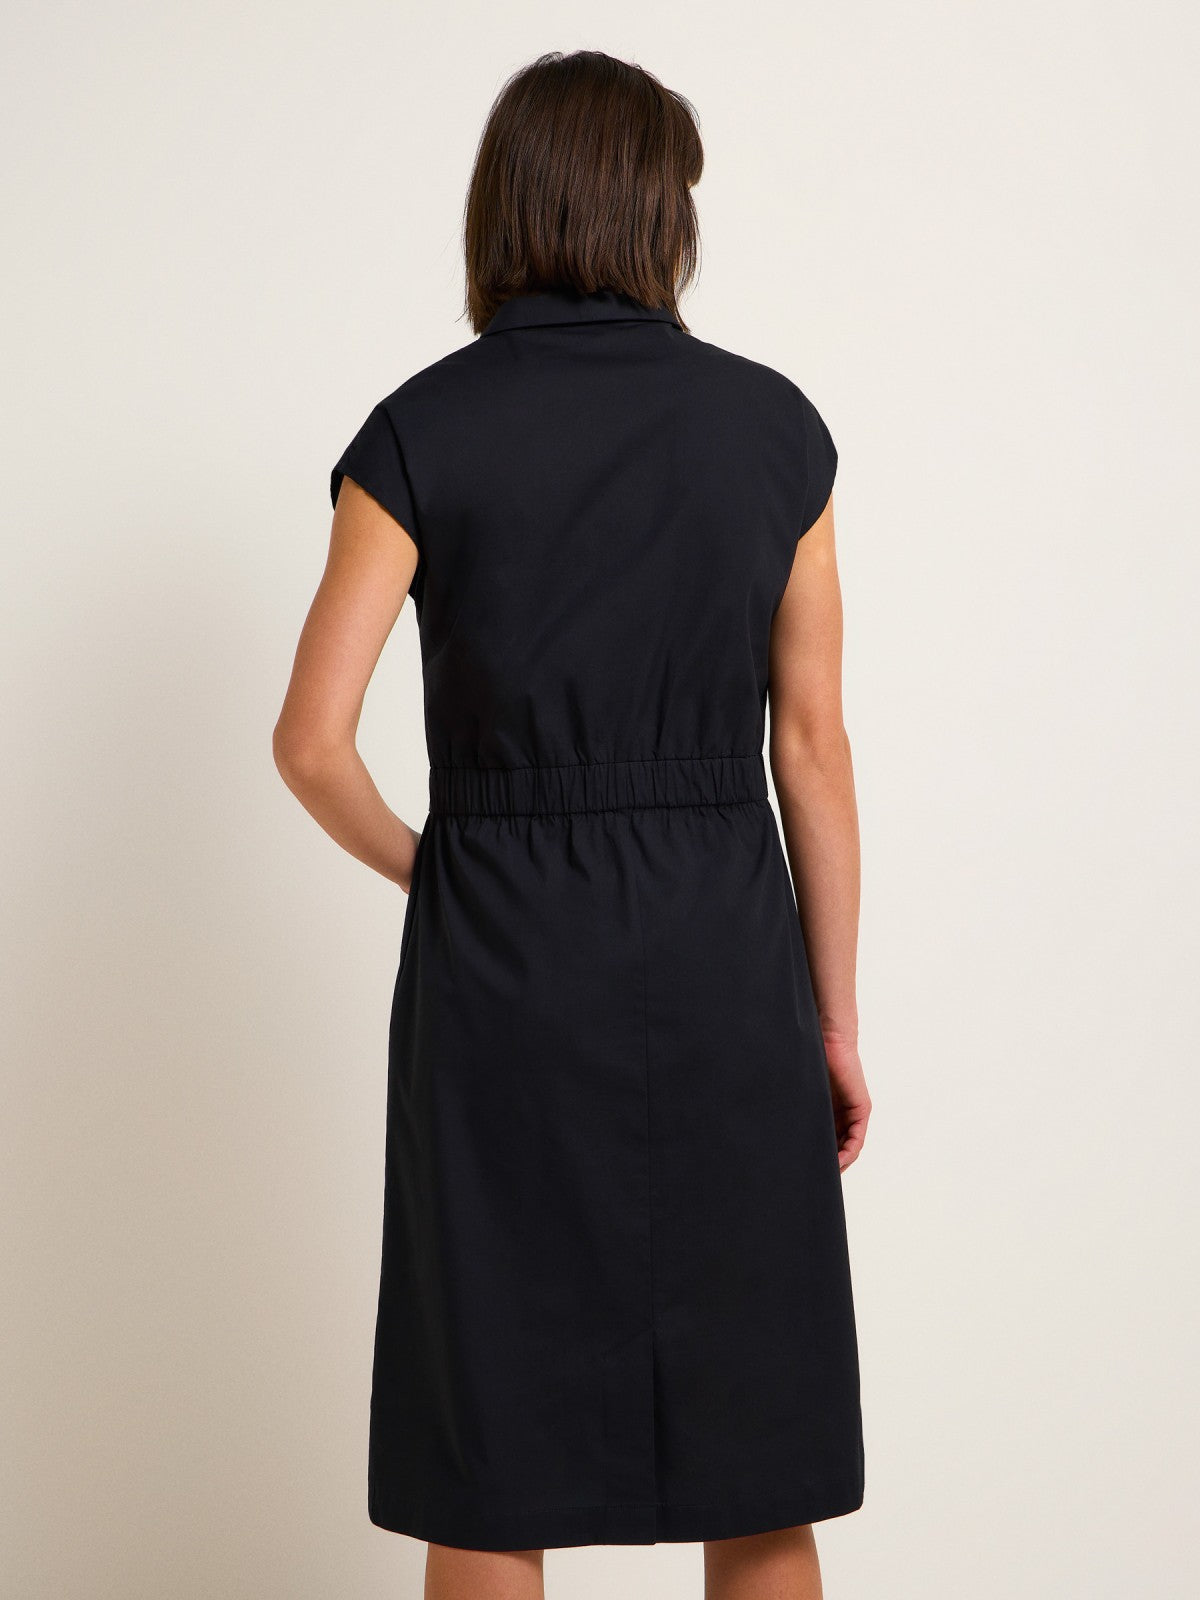 DRESS WITH MOCK NECK (GOTS) made of organic cotton - Black